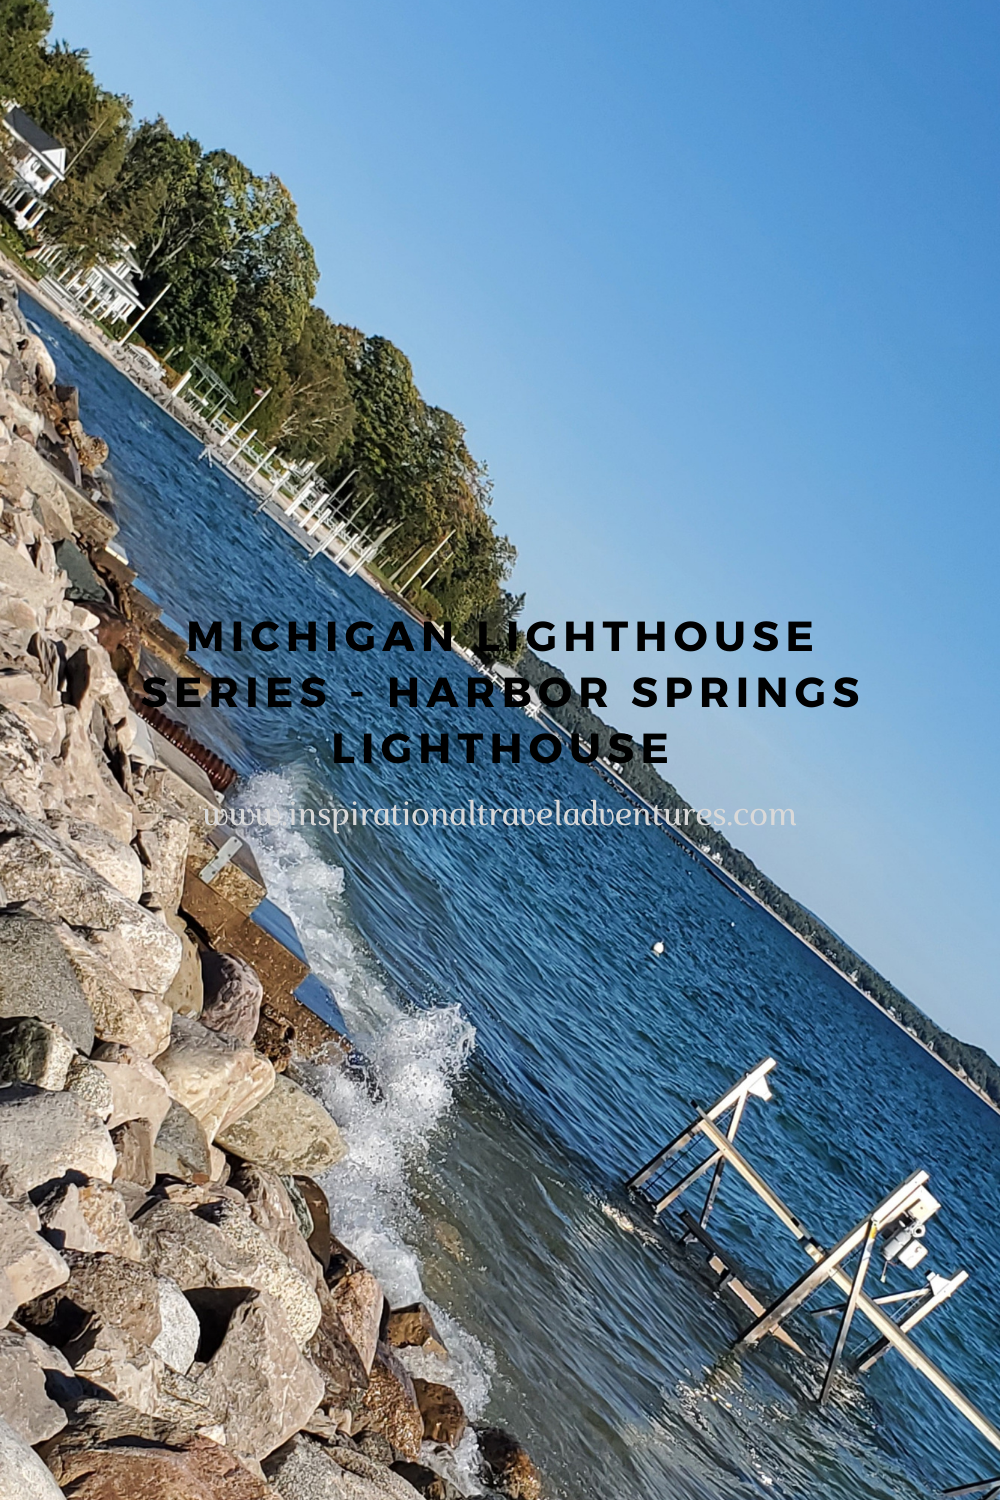 MICHIGAN LIGHTHOUSE SERIES - HARBOR POINT'S LIGHTHOUSE